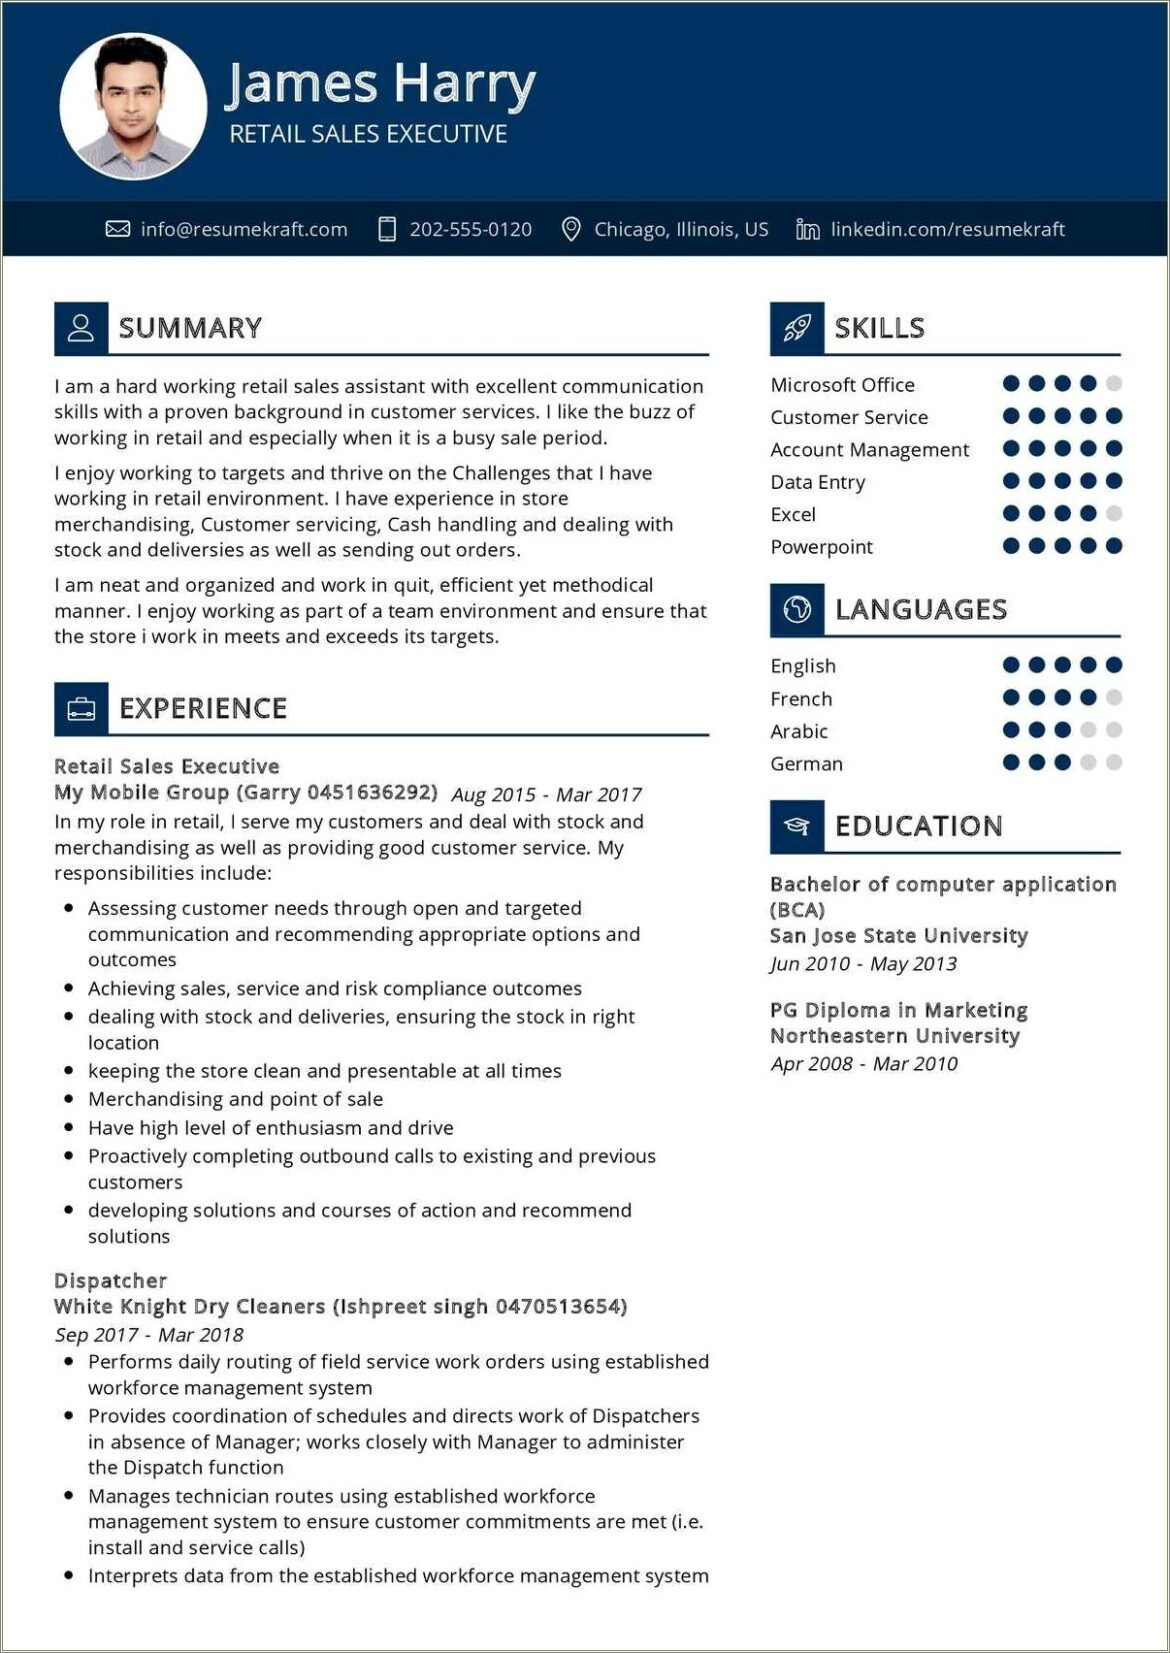 Sample Resume For High End Retail Sales